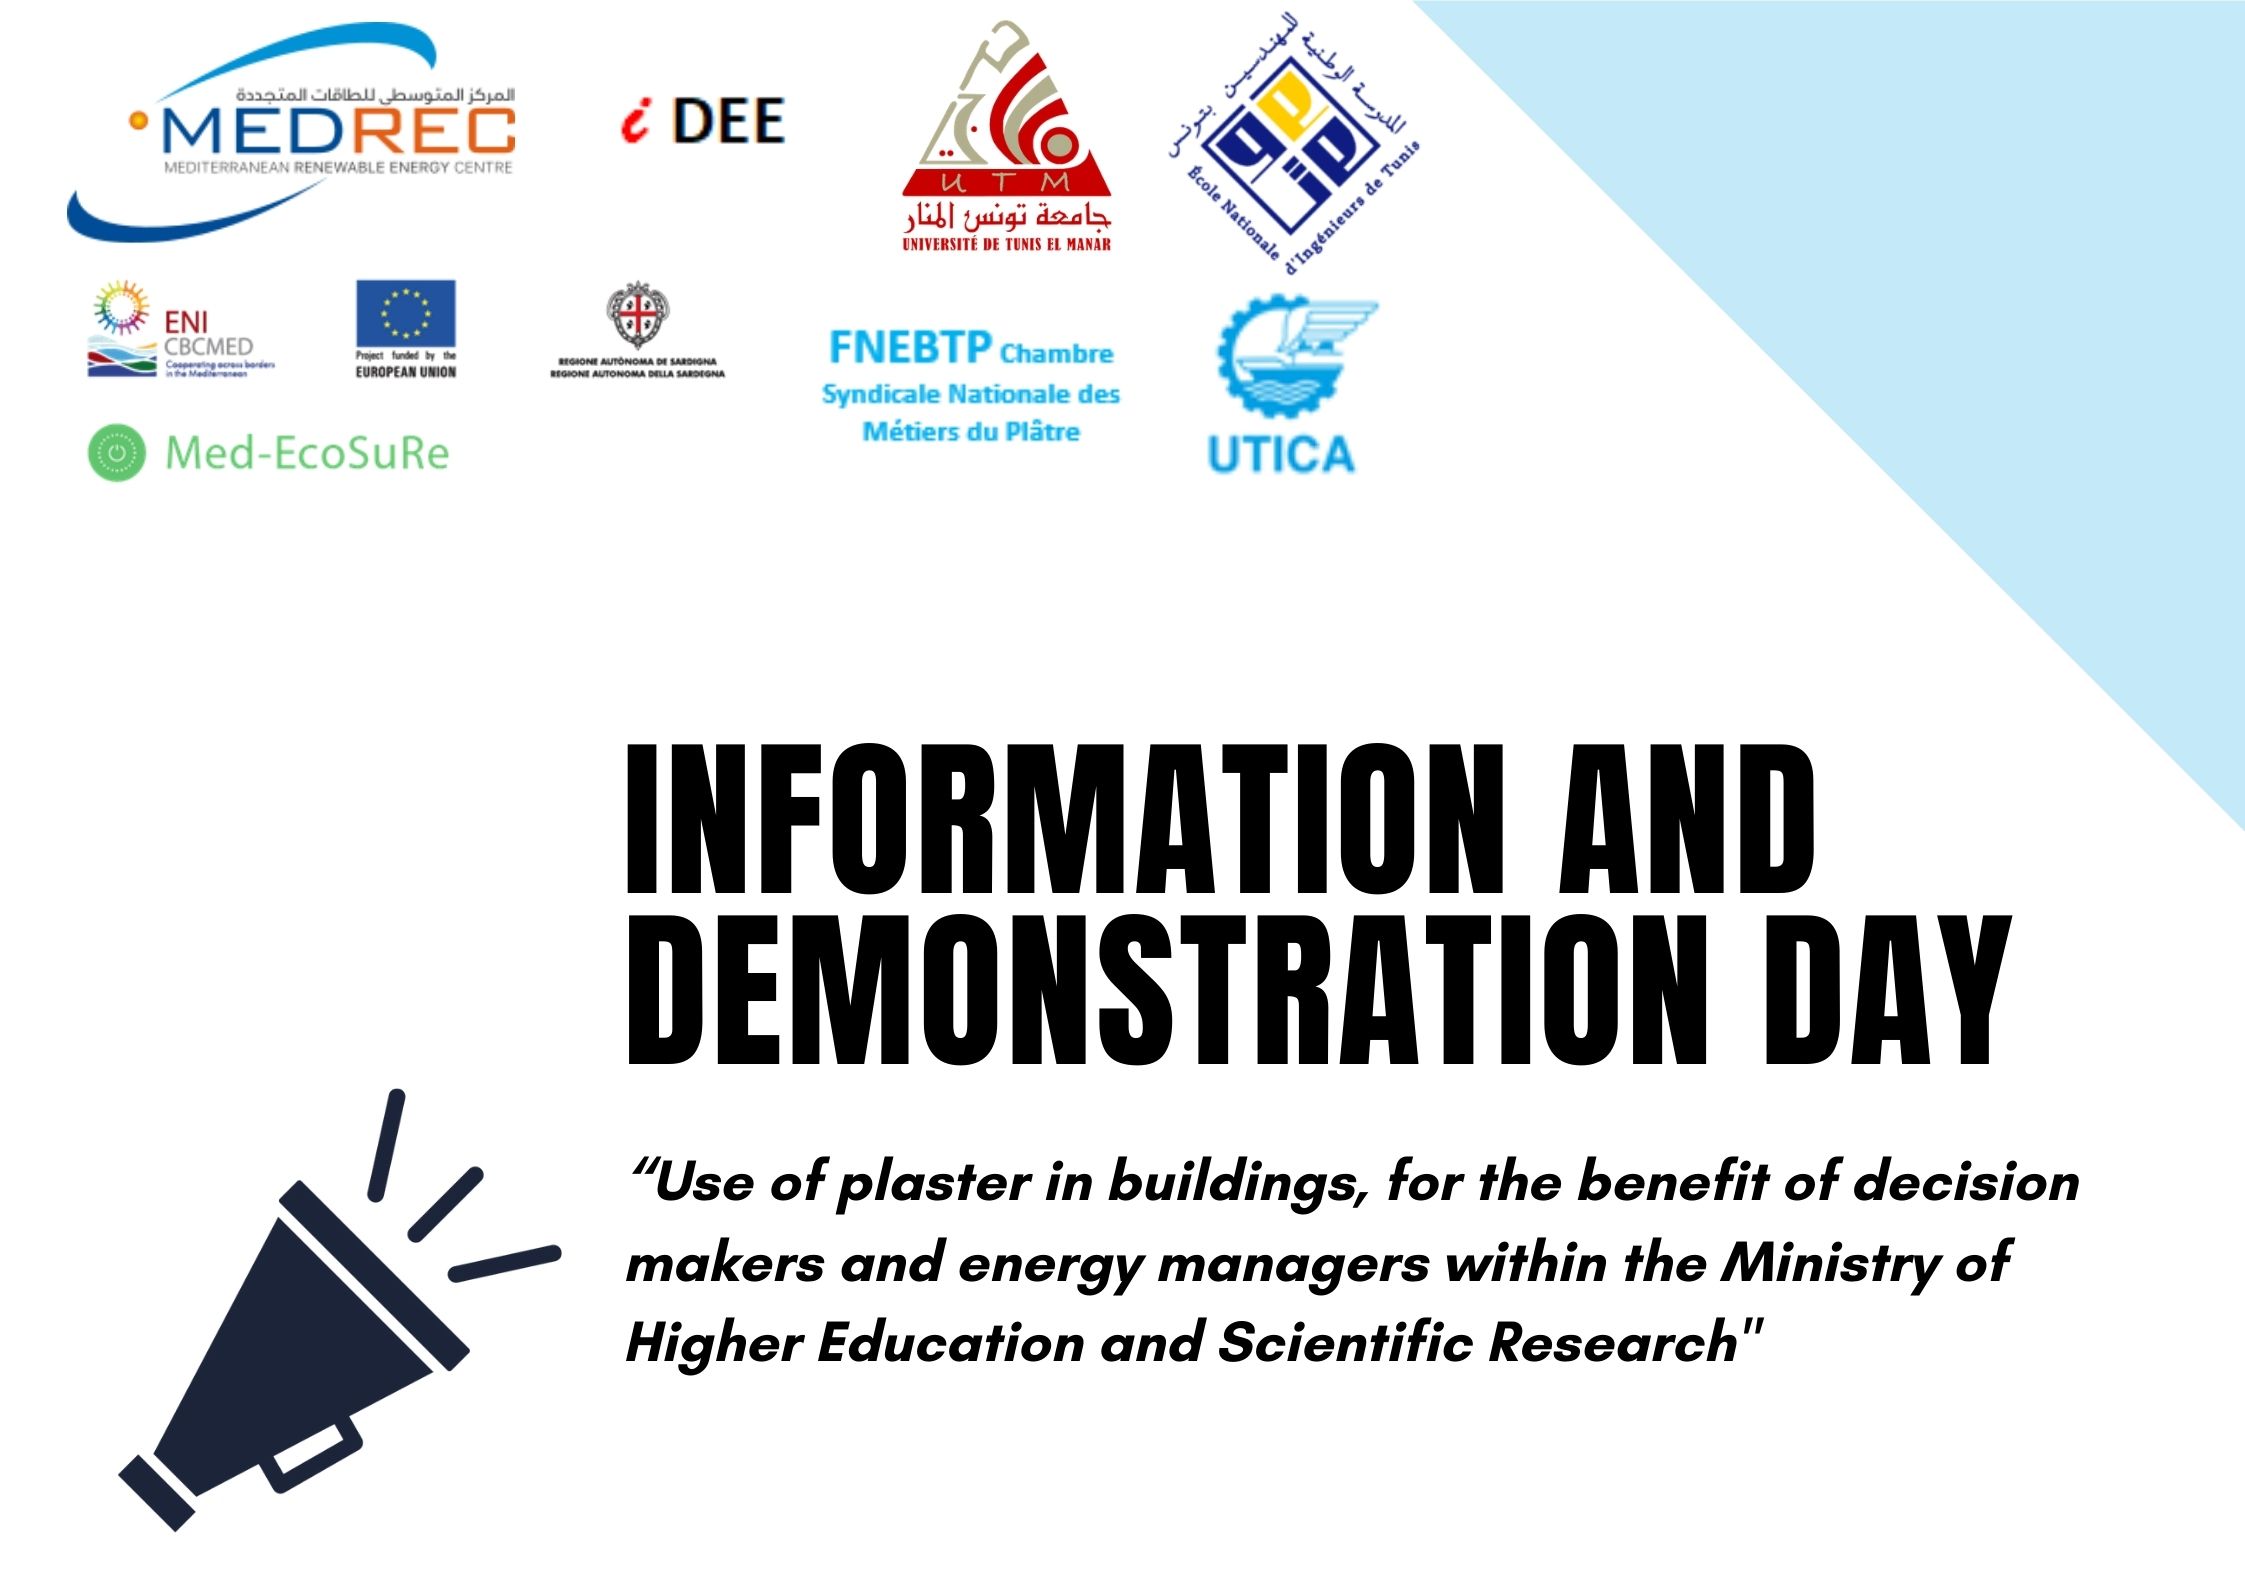 Information and Demonstration day “Use of plaster in buildings, for the benefit of decision makers and energy managers within the Ministry of Higher Education and Scientific Research"